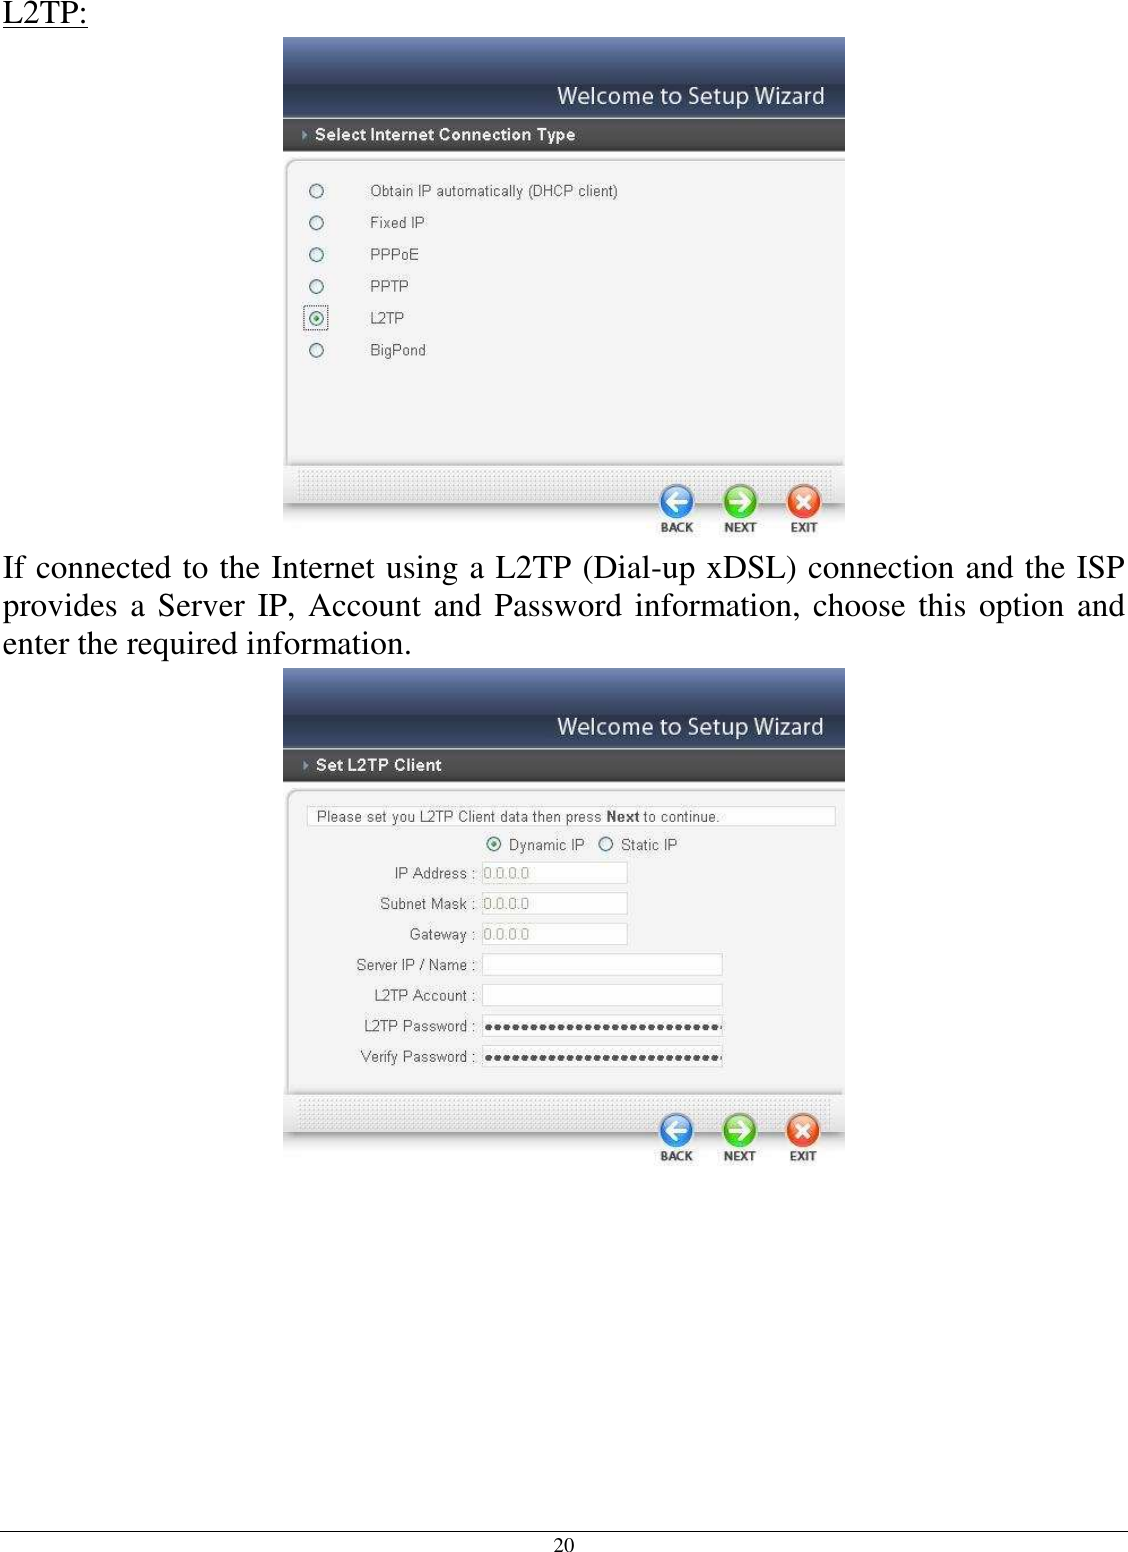 20 L2TP:  If connected to the Internet using a L2TP (Dial-up xDSL) connection and the ISP provides a Server IP, Account and Password information, choose this option and enter the required information.  